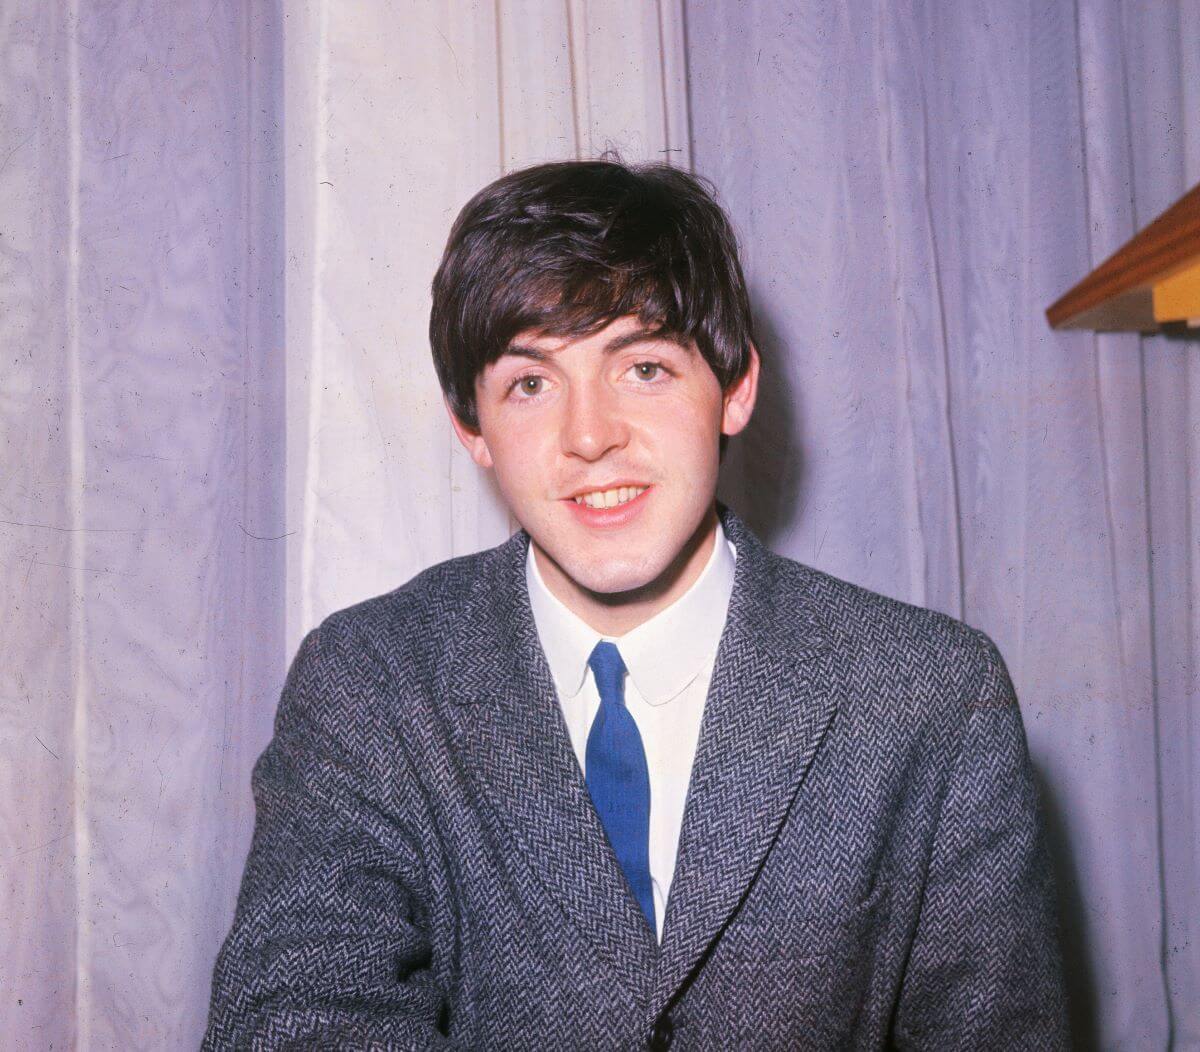 The Beatles' Paul McCartney wears a tweed jacket and sits in front of a curtain.